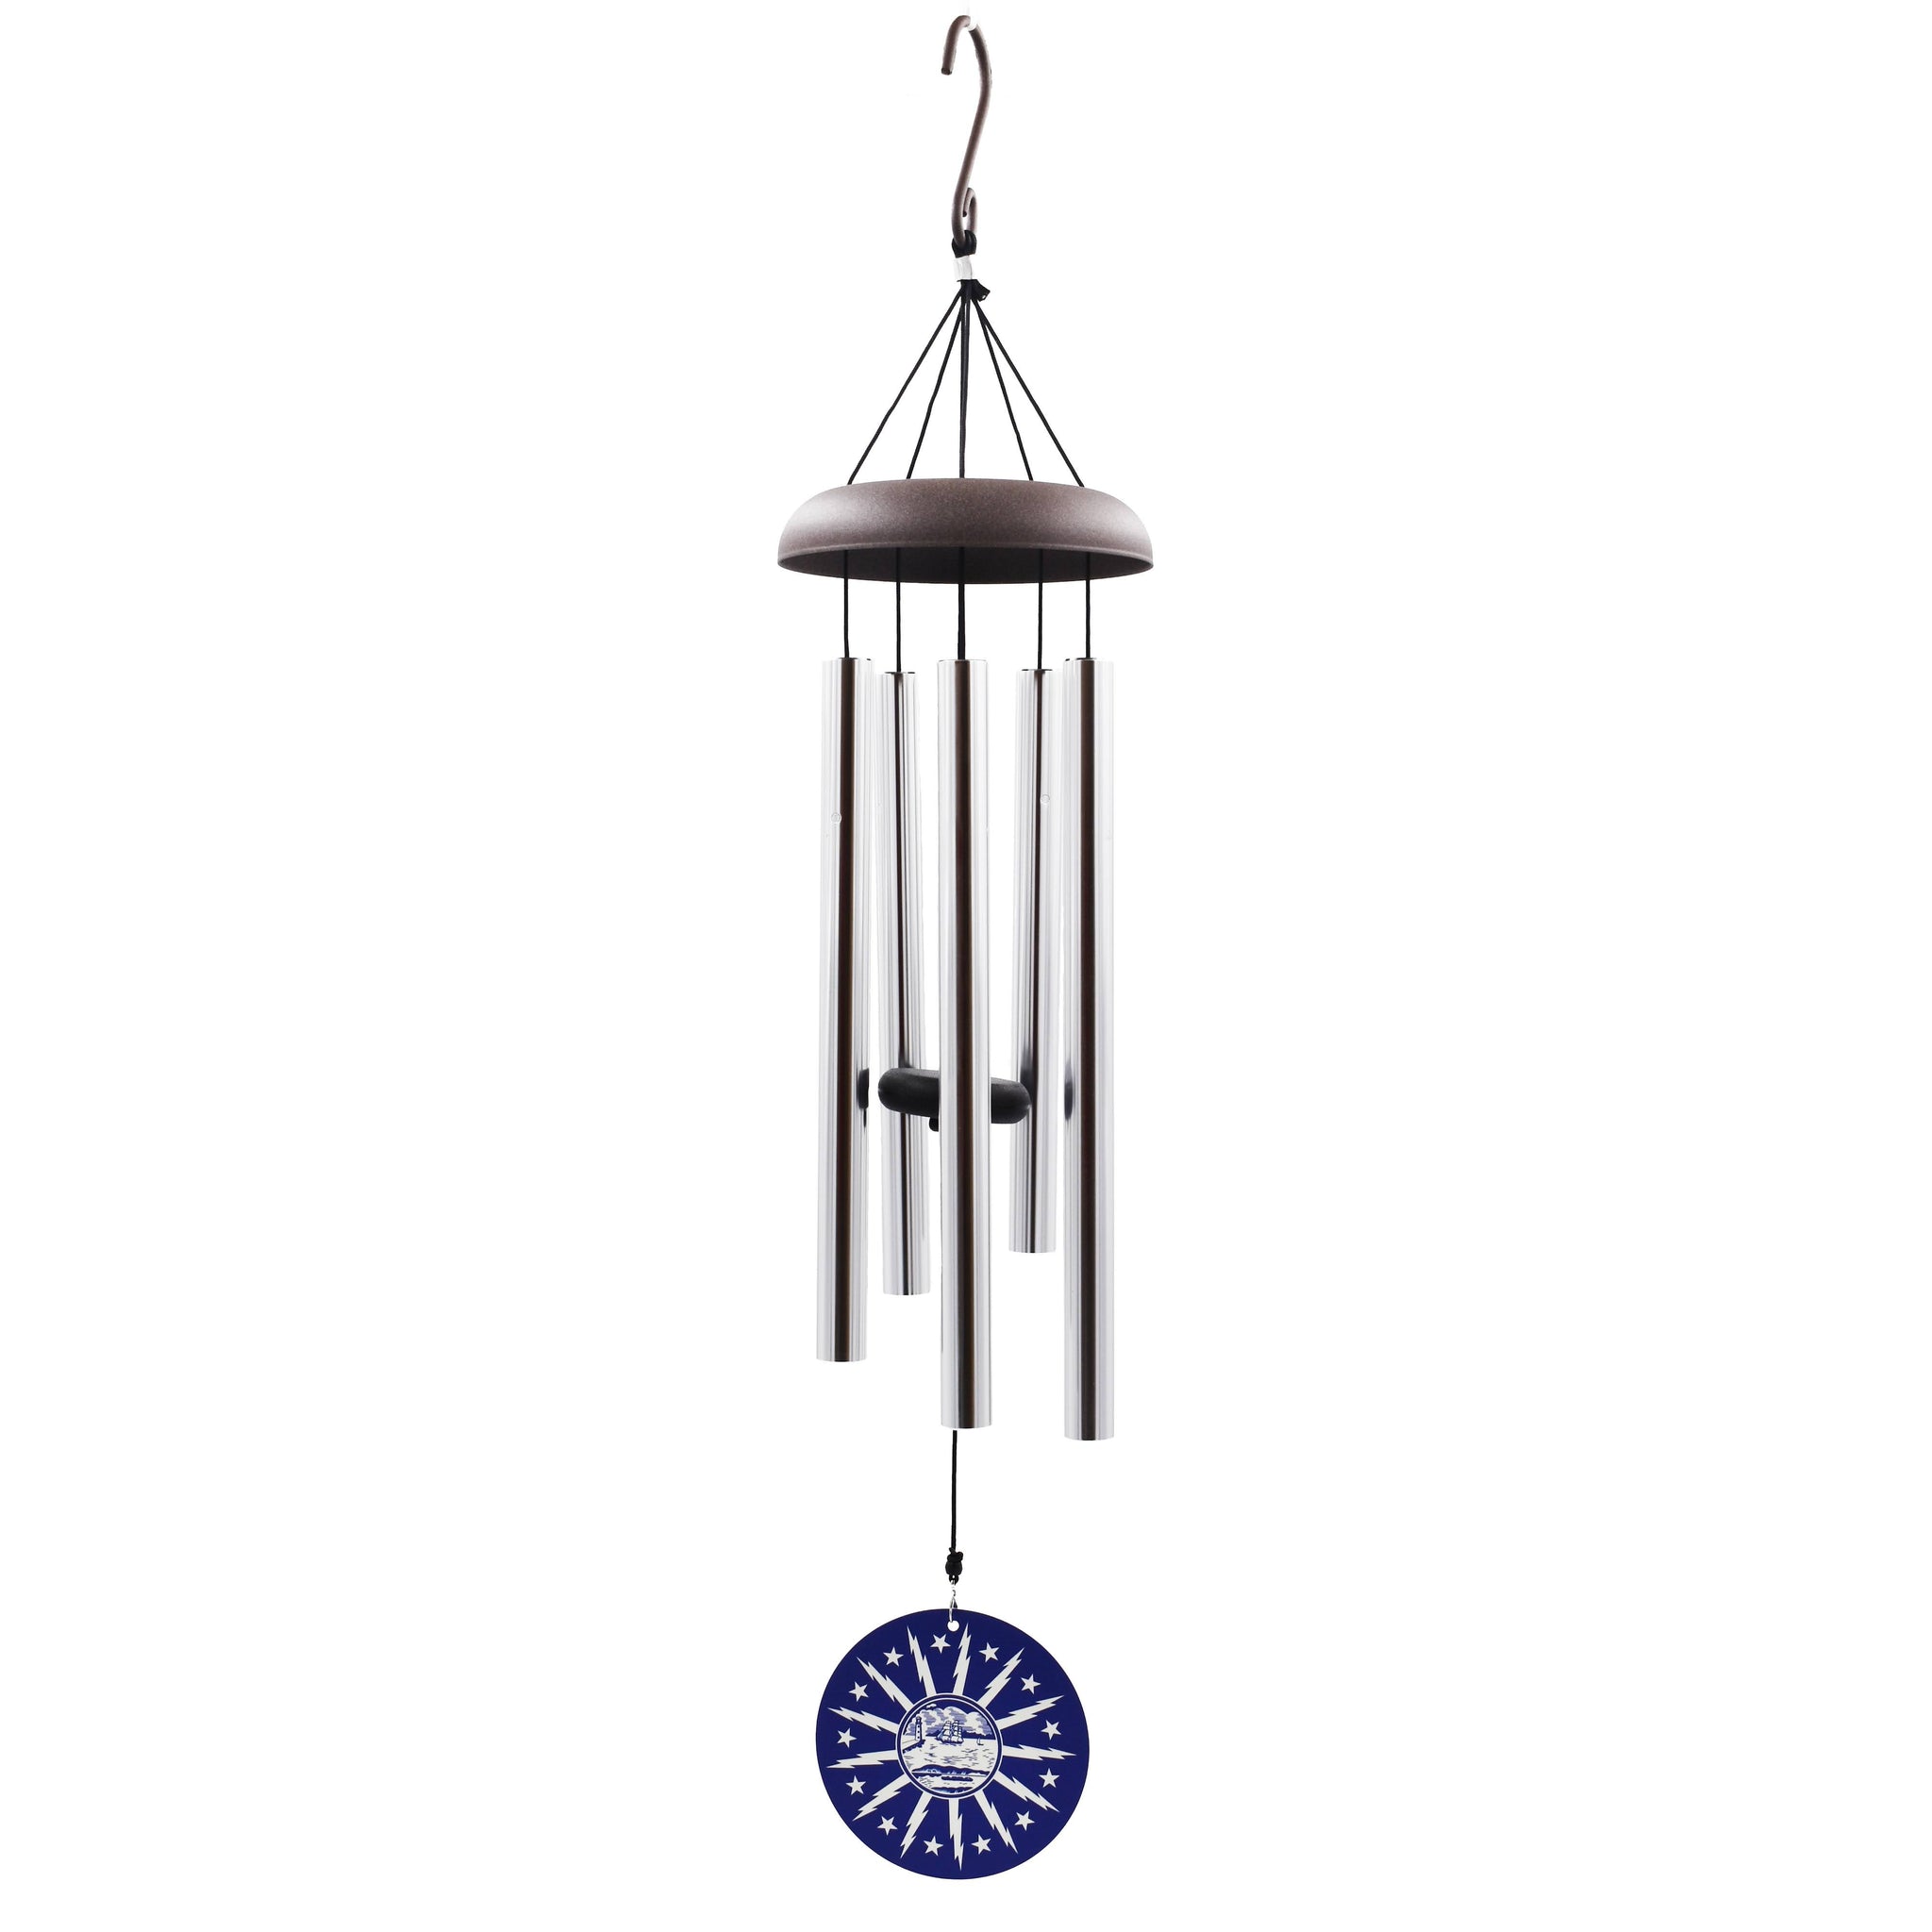 bflo store buffalo by large seal of the city flag wind chime